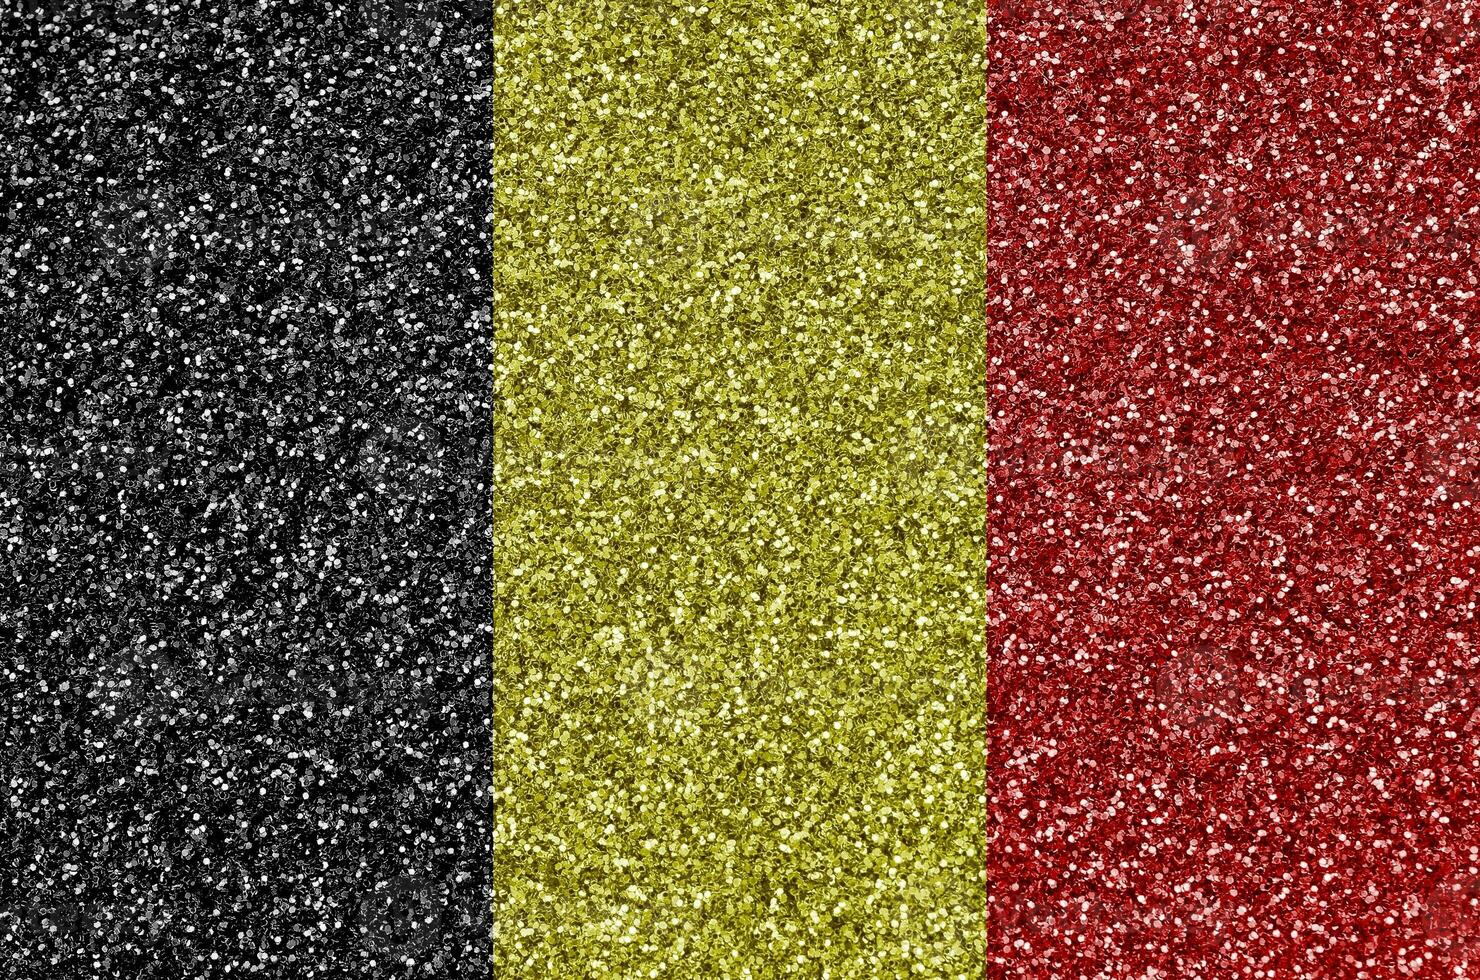 Belgium flag depicted on many small shiny sequins. Colorful festival background for party photo